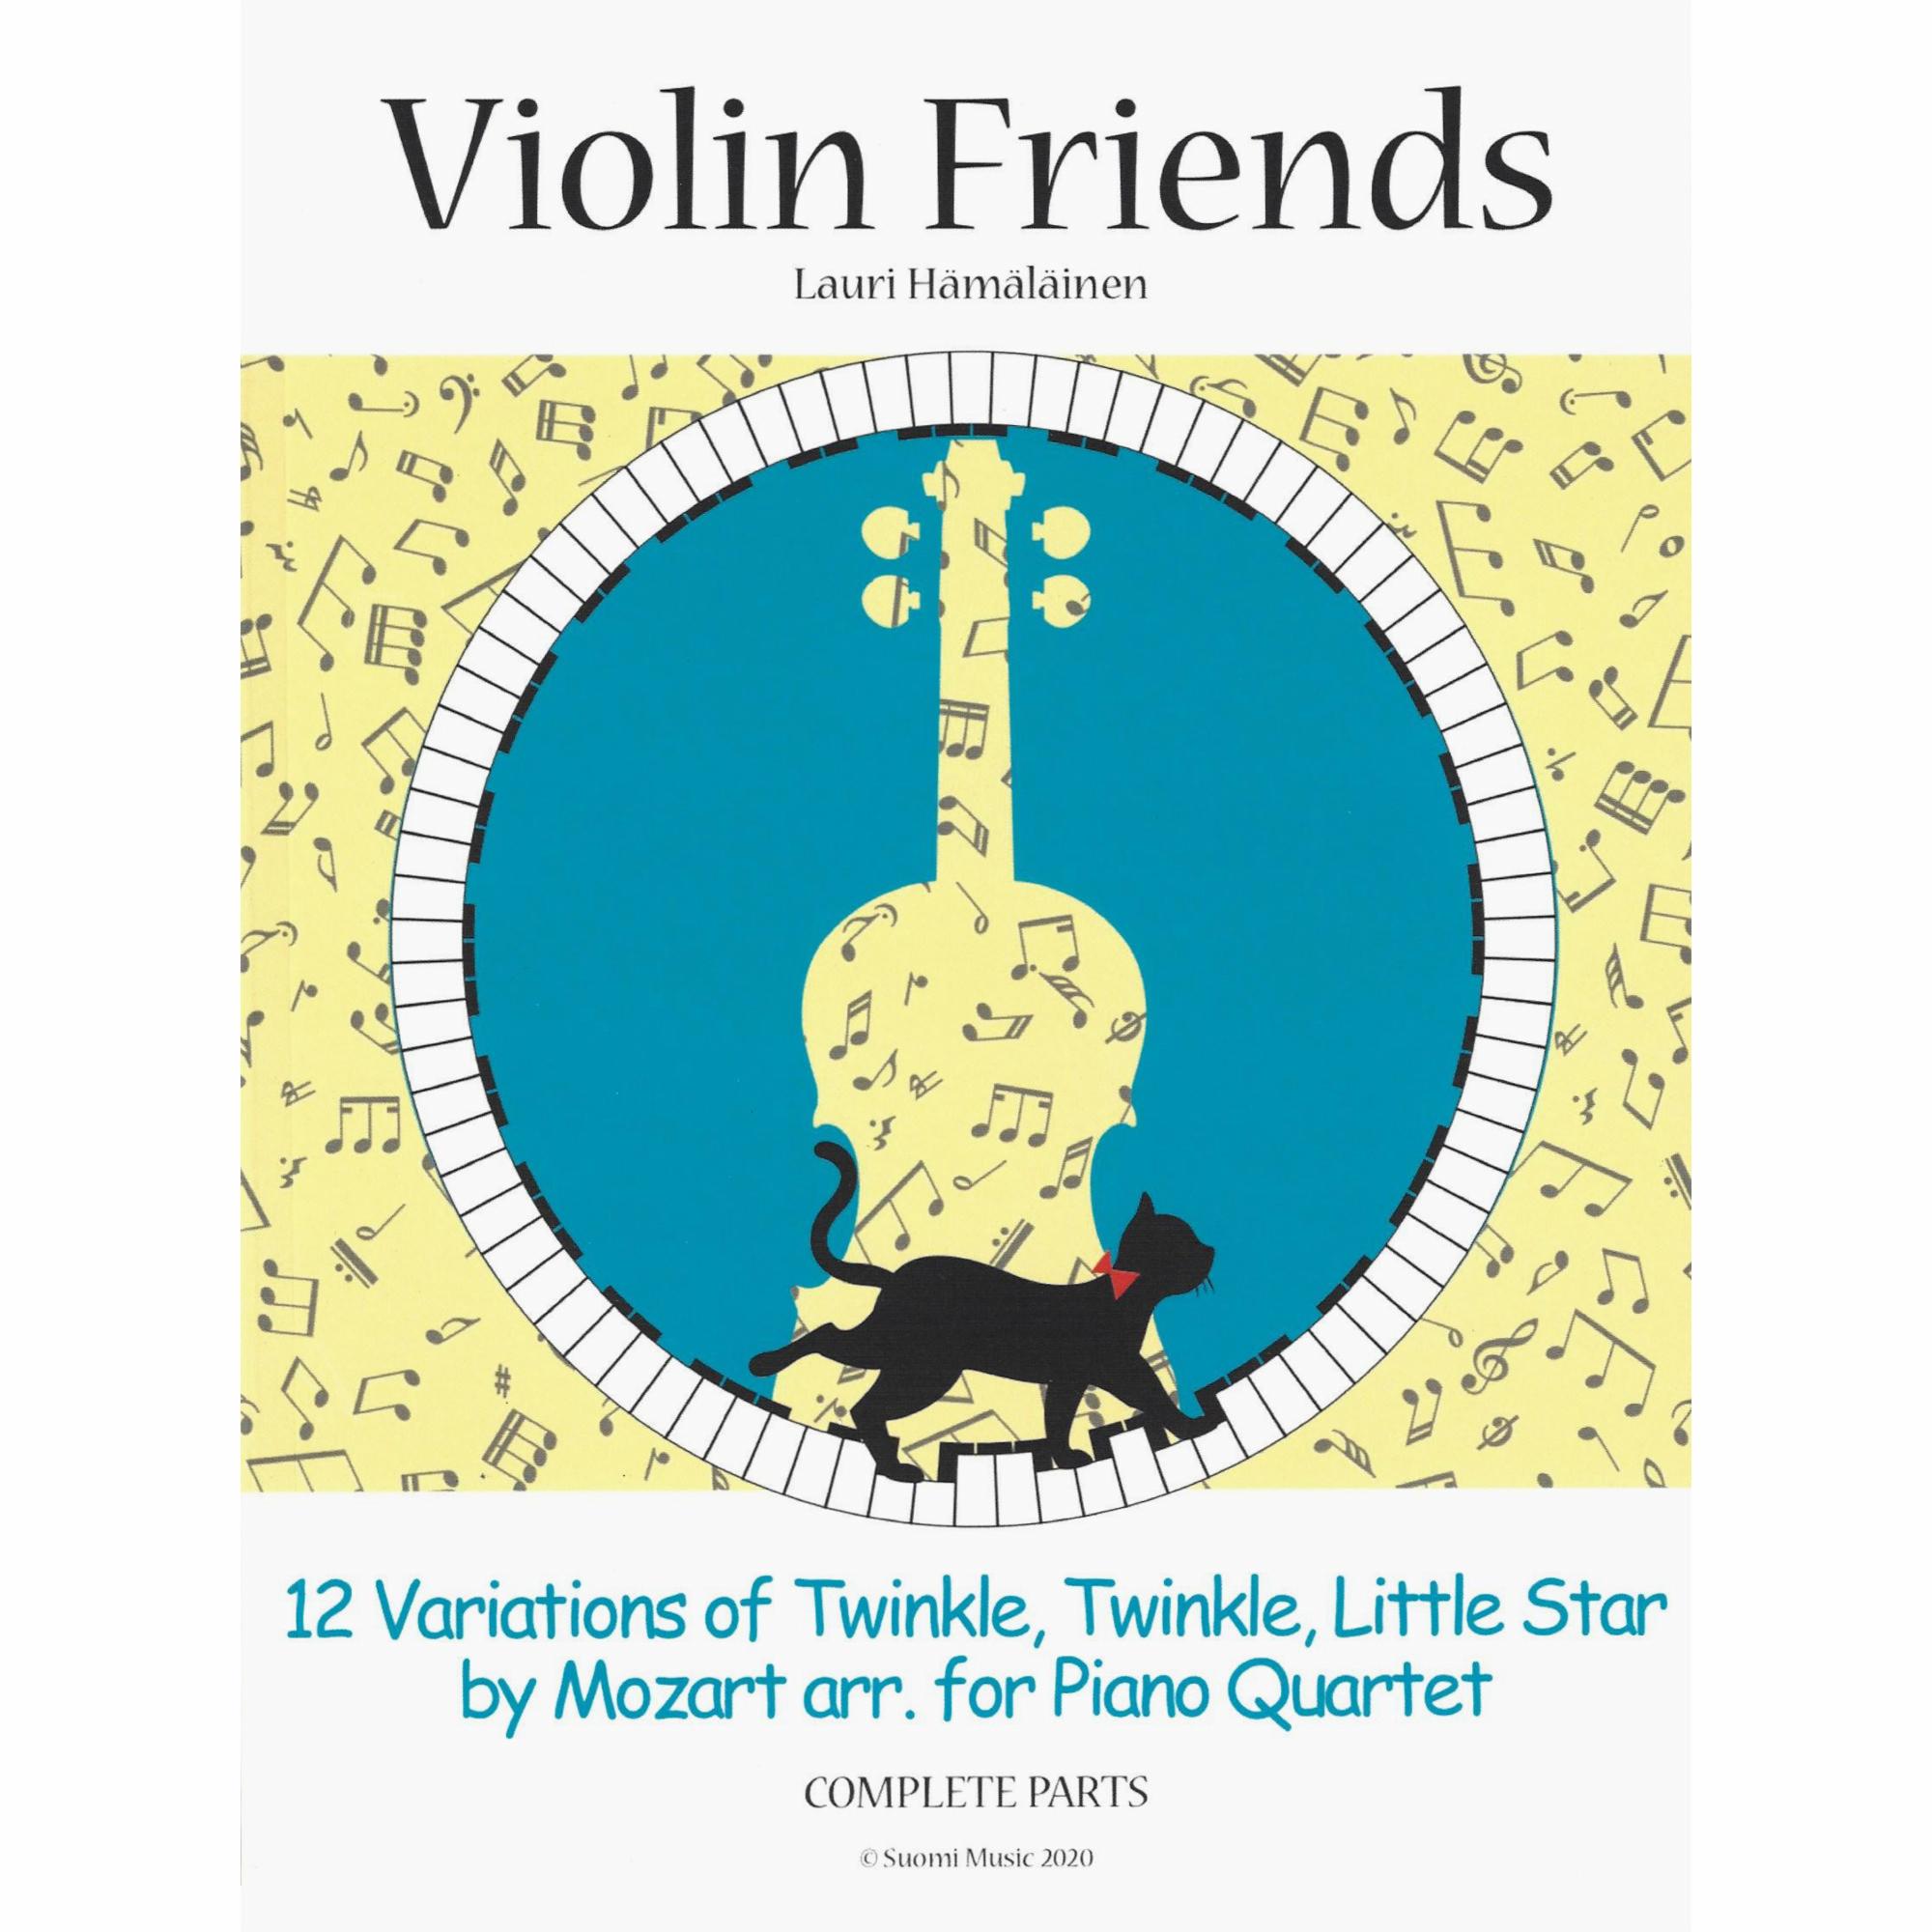 Violin Friends: 12 Variations of Twinkle, Twinkle, Little Star for Piano Quartet